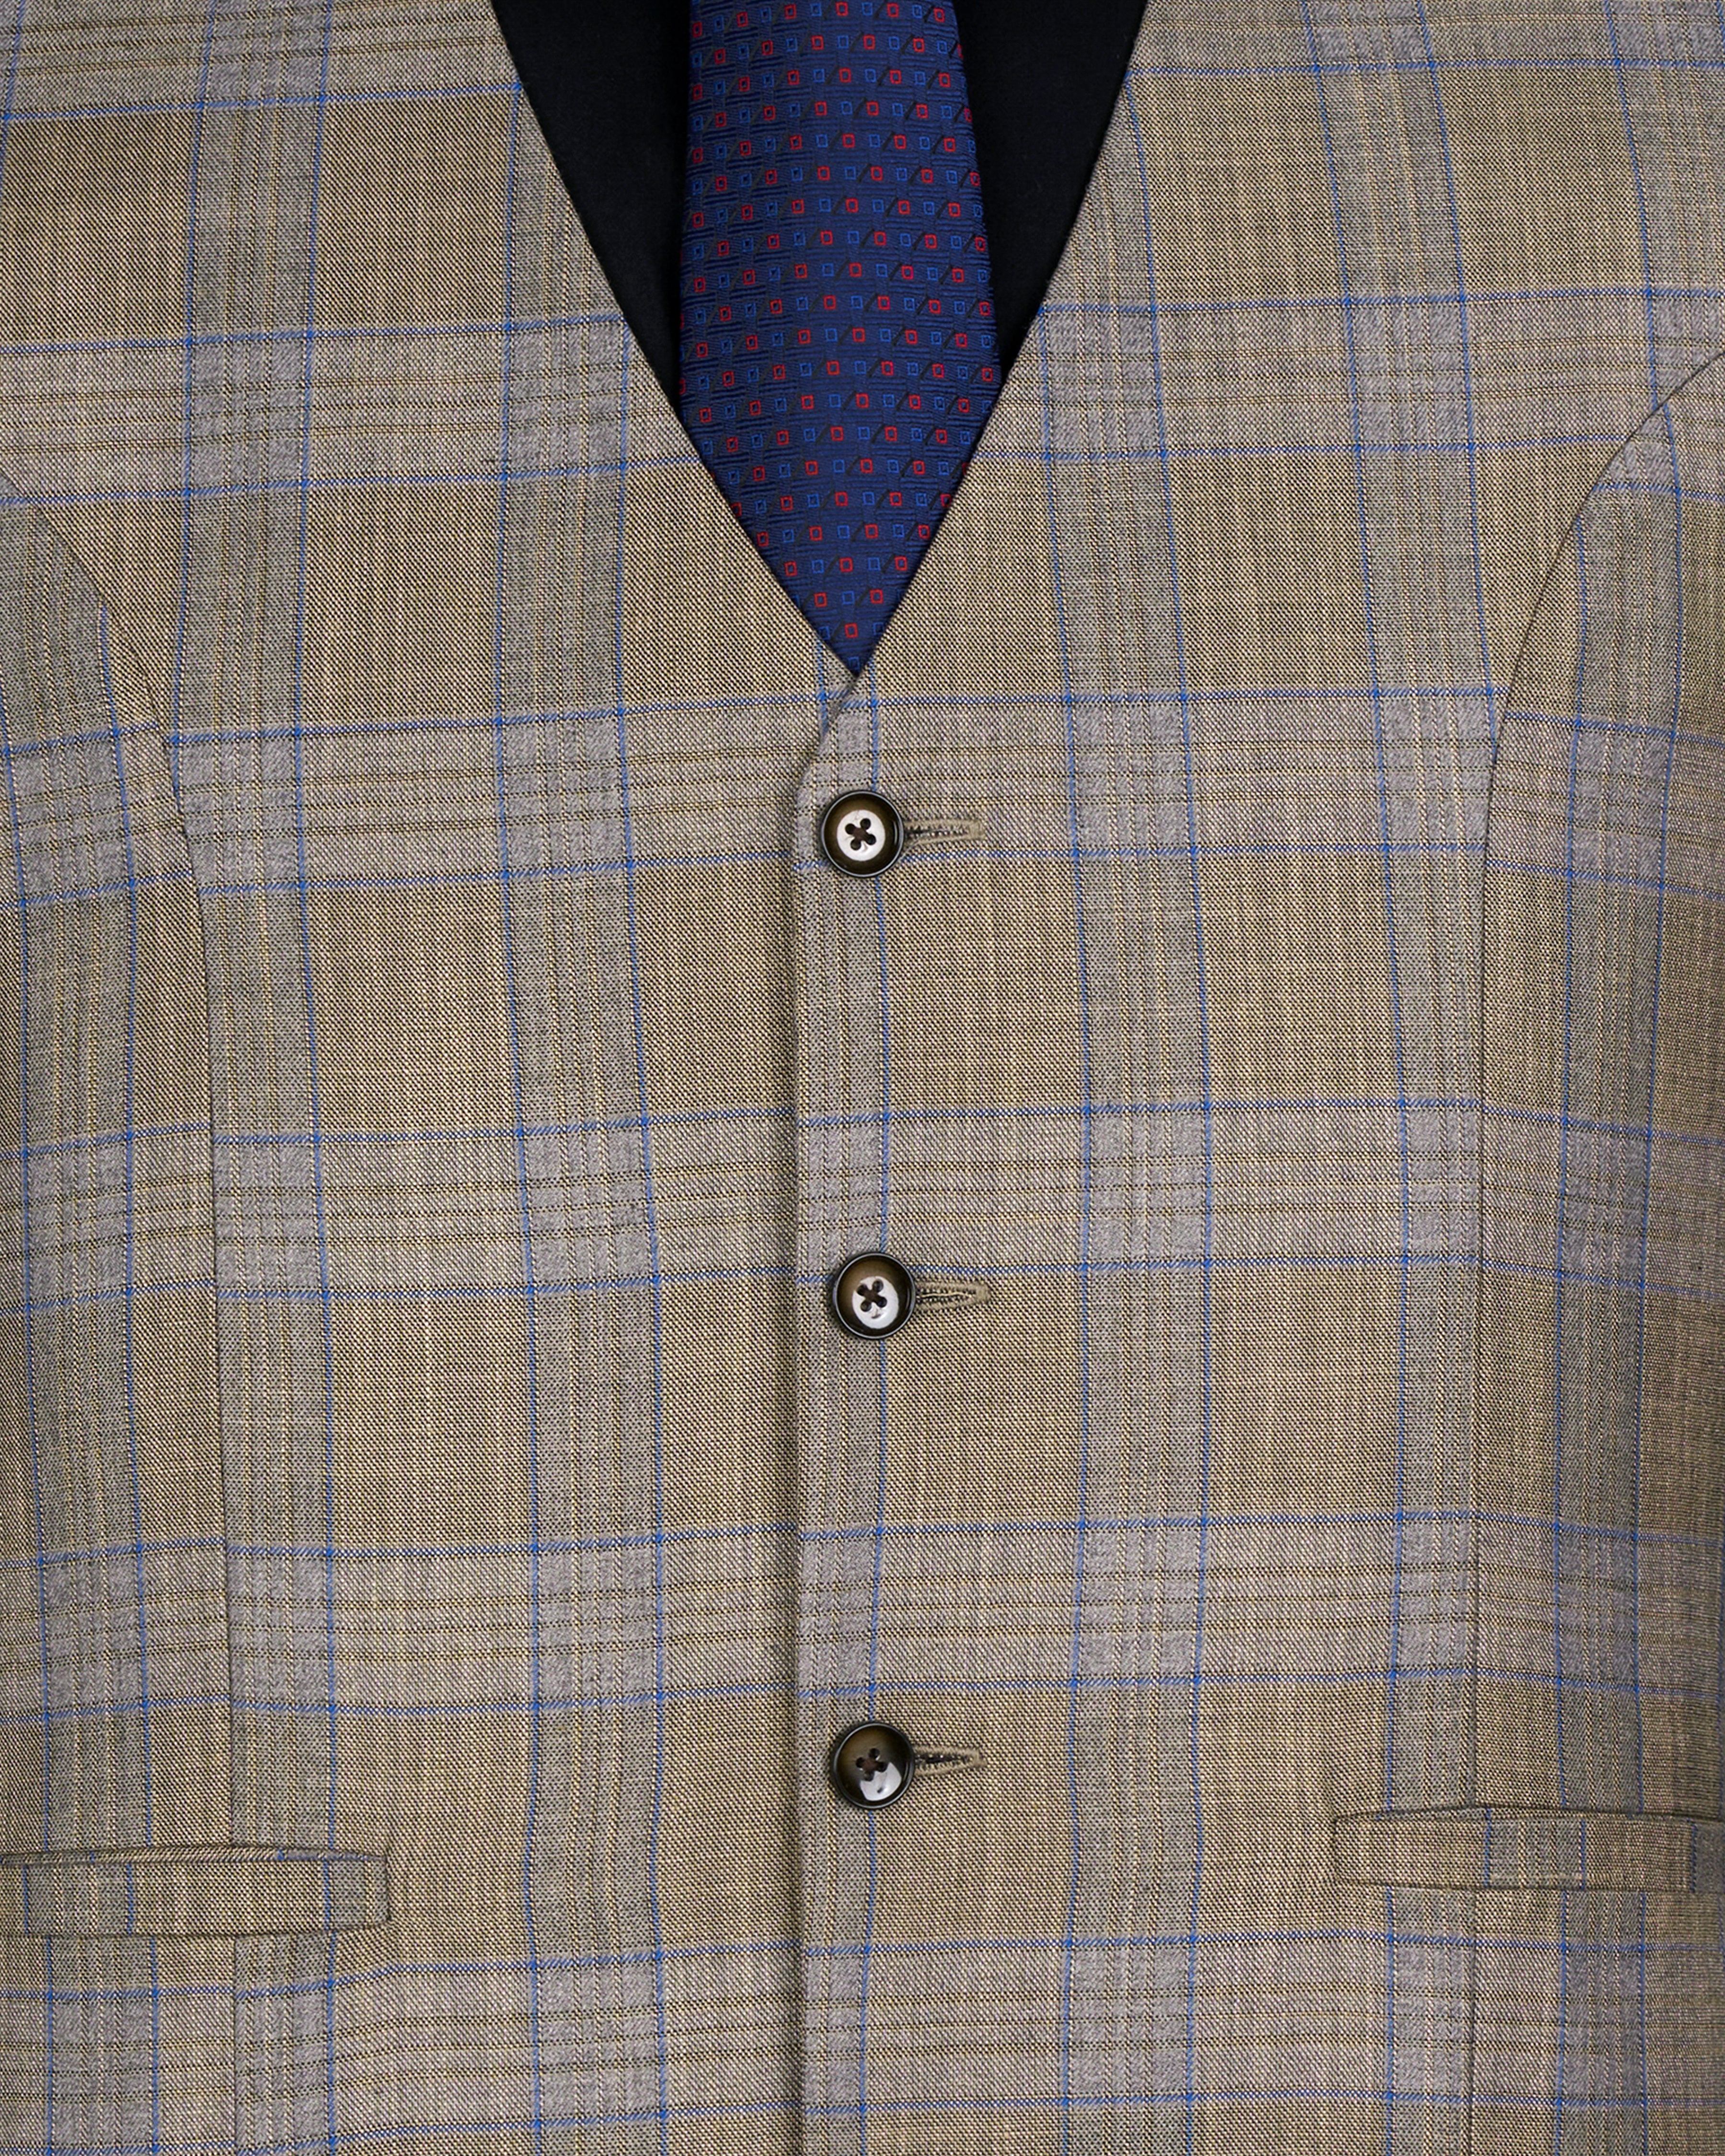 Arrowtown Brown with Azure Blue Plaid Waistcoat V2611-36, V2611-38, V2611-40, V2611-42, V2611-44, V2611-46, V2611-48, V2611-50, V2611-52, V2611-54, V2611-56, V2611-58, V2611-60